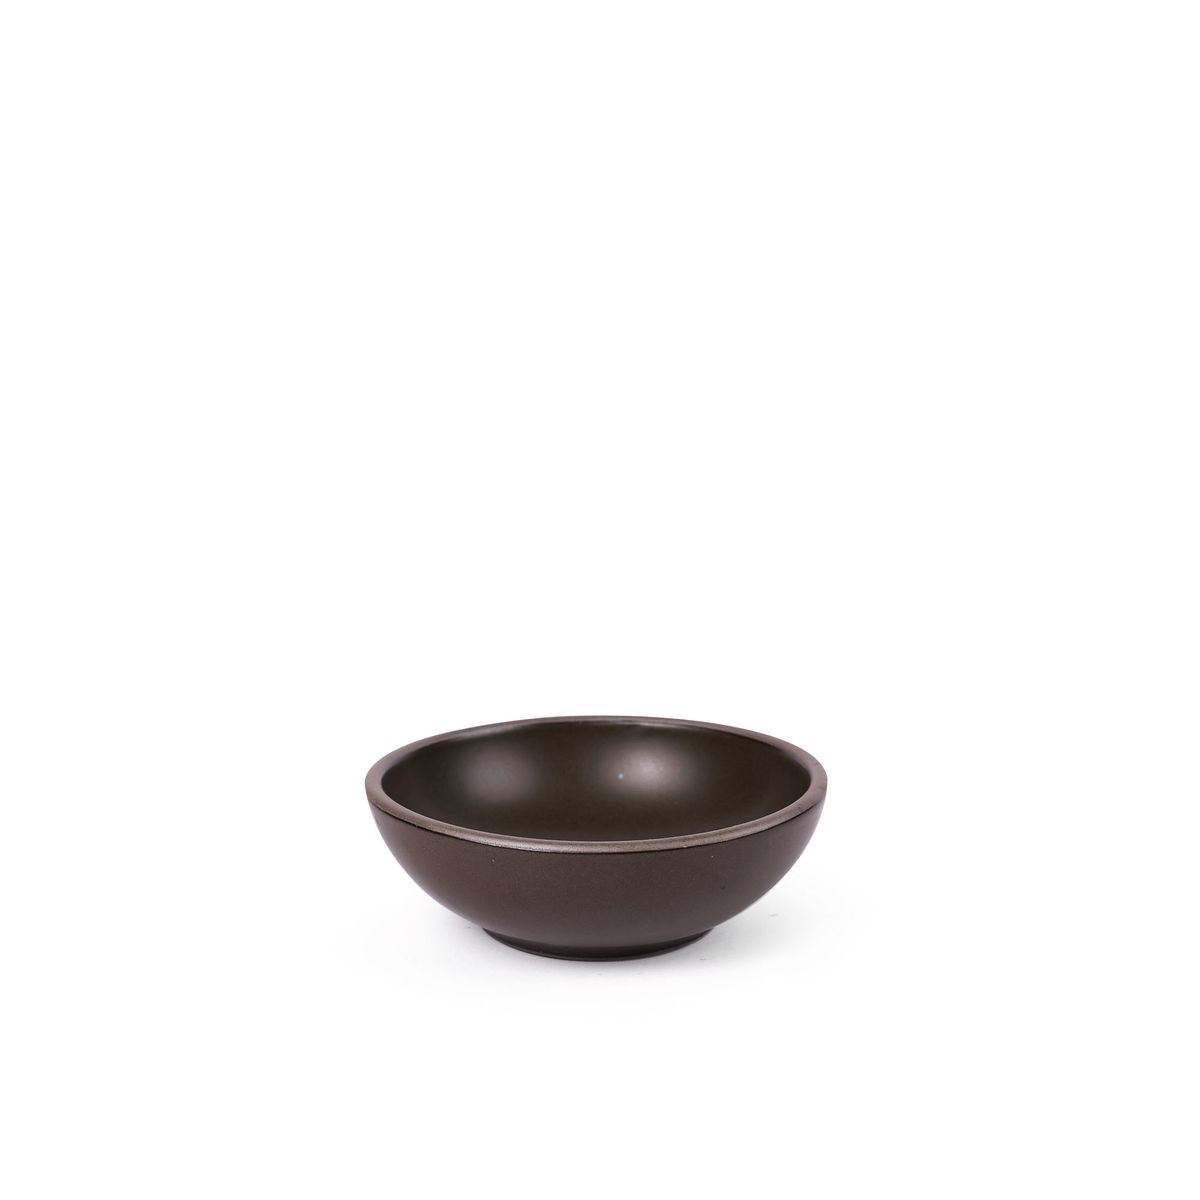 A small shallow ceramic bowl in a dark cool brown color featuring iron speckles and an unglazed rim